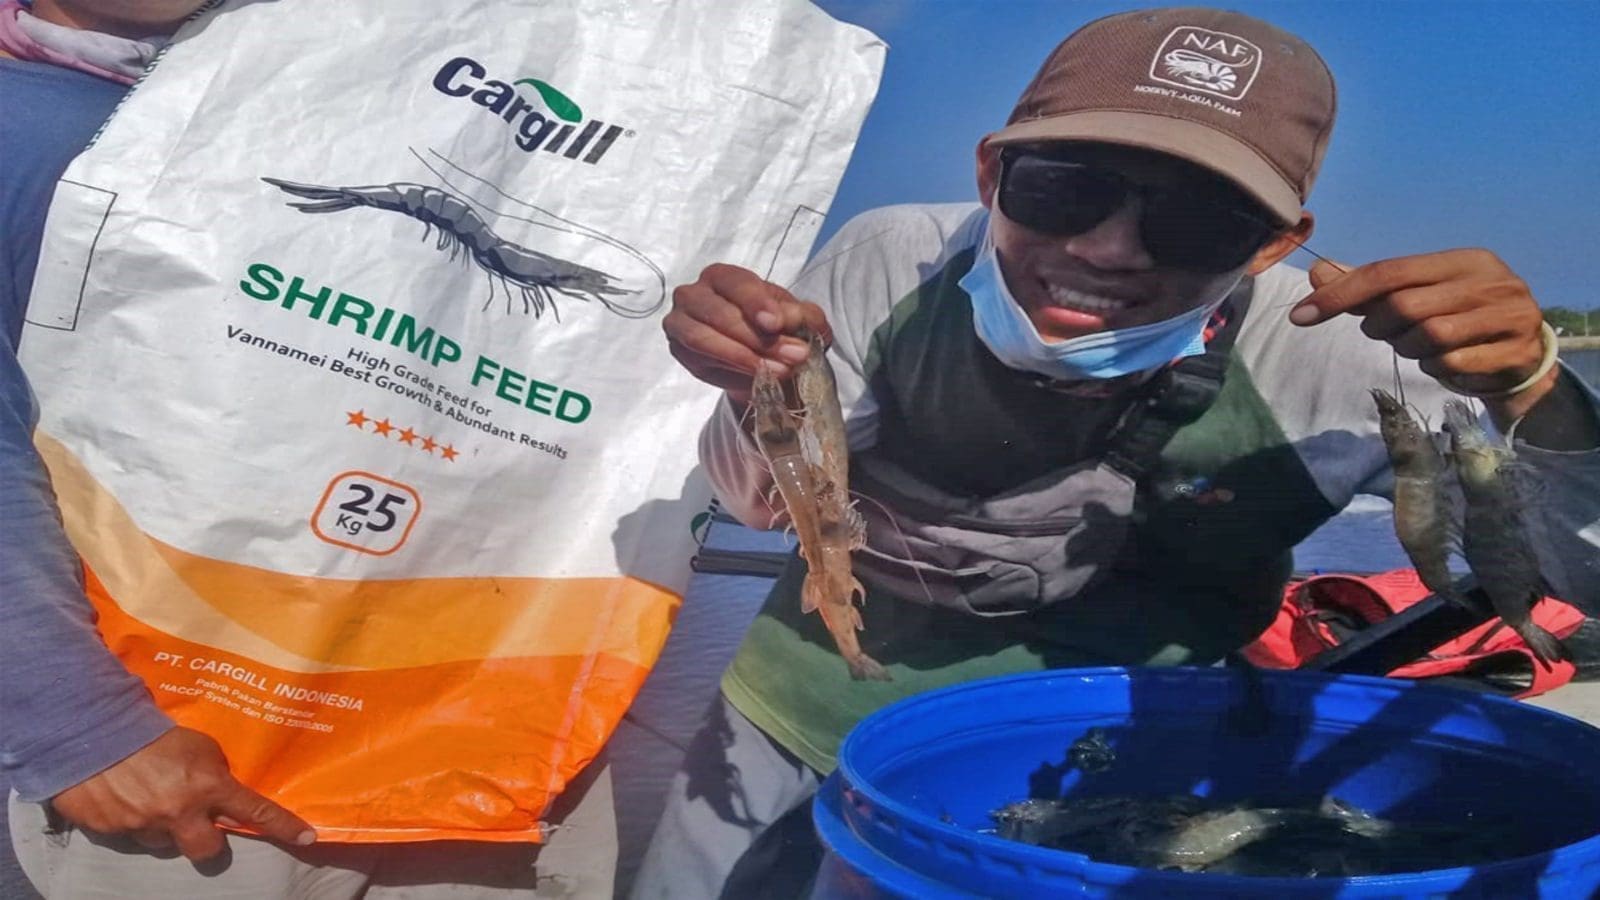 Cargill forms new joint venture in Ecuador to bolster shrimp feed production